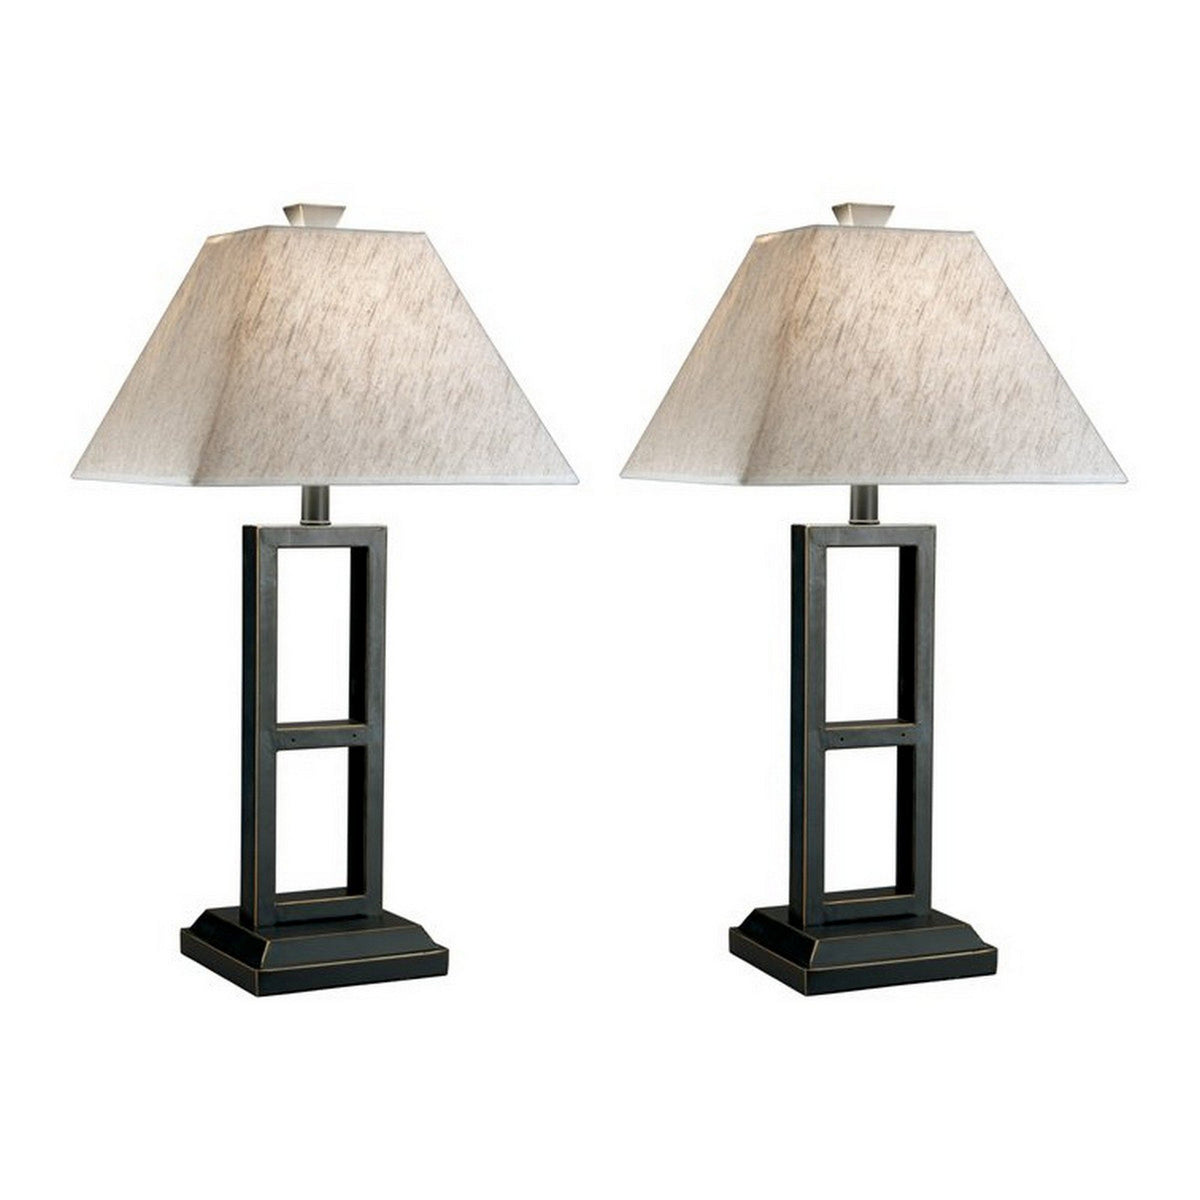 Geometric Metal Body Table Lamp with Fabric Shade, Set of 2,Black and White - BM227561